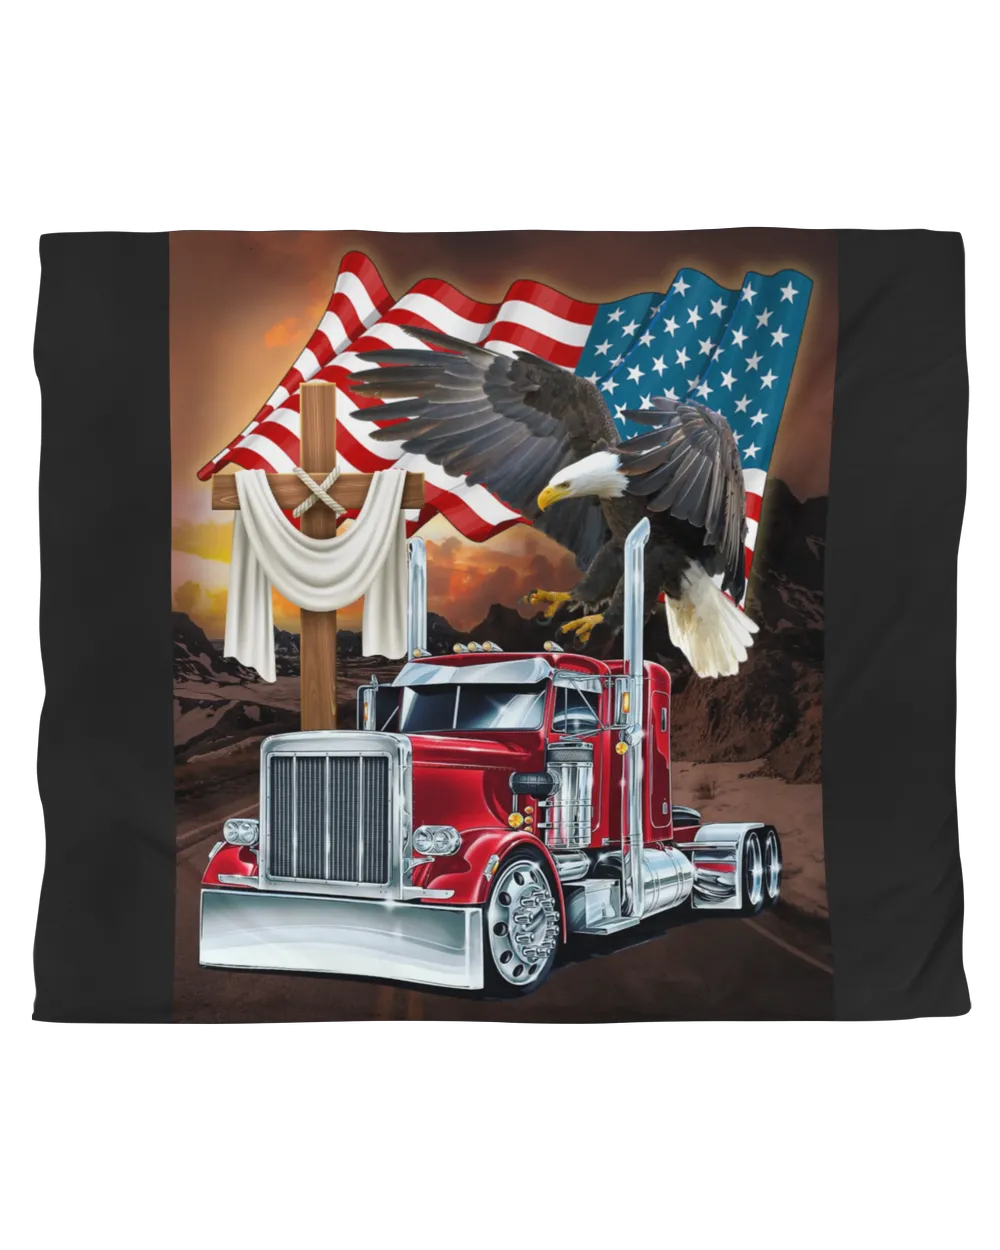 Special edition for trucker